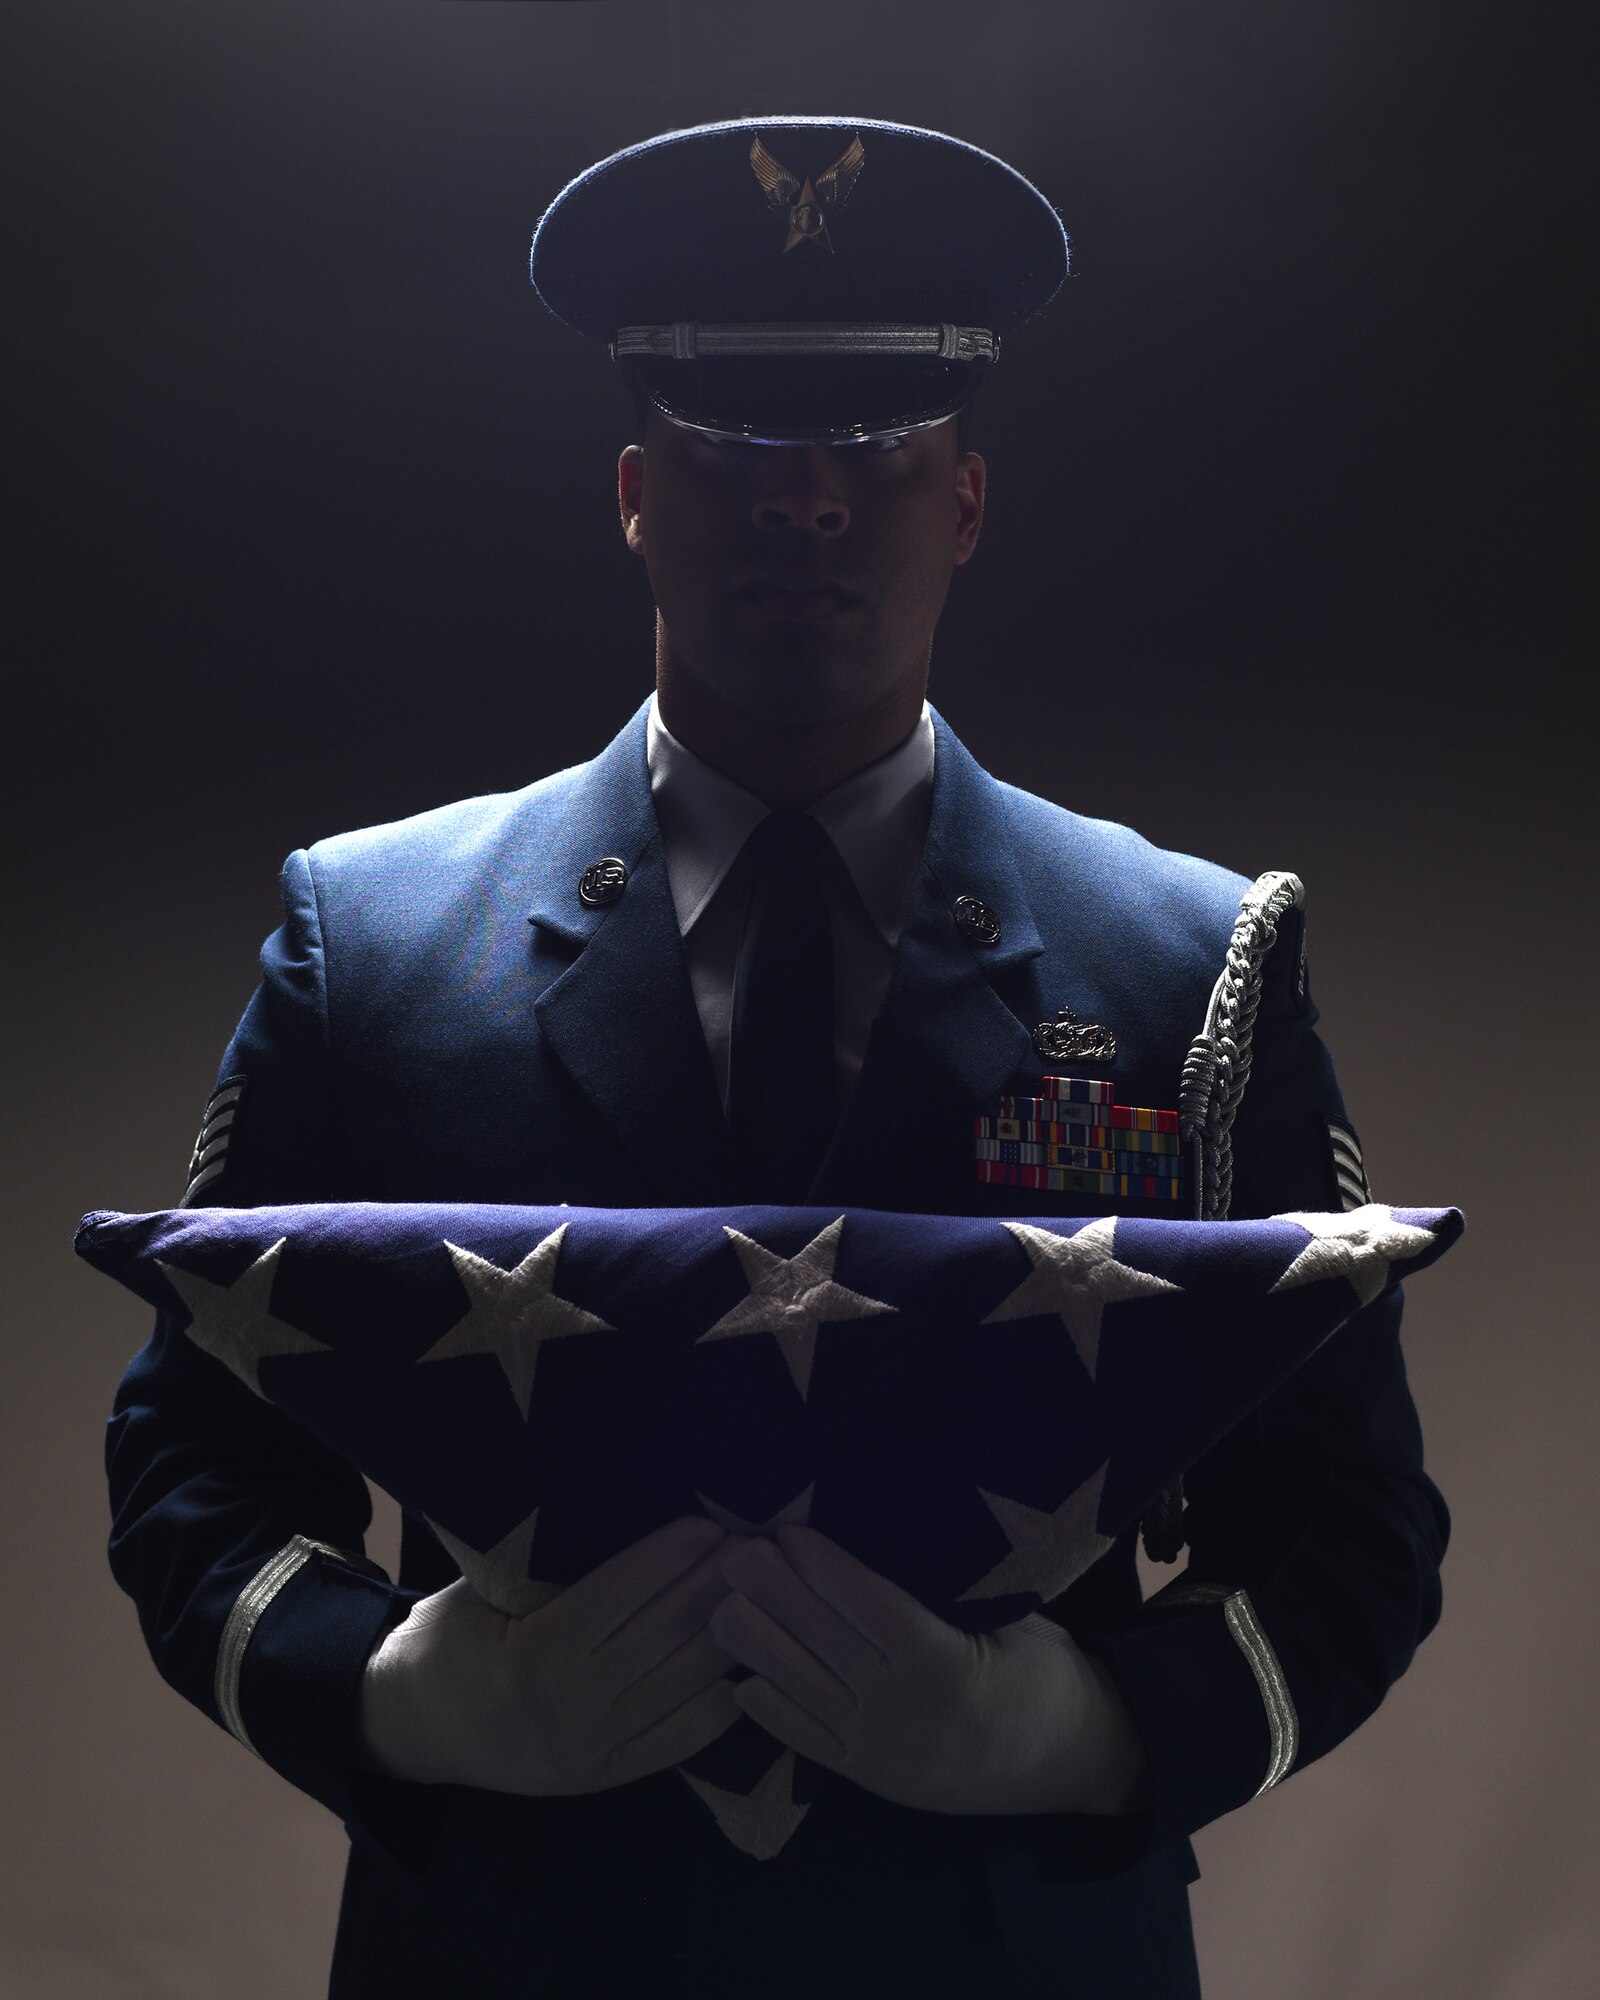 Staff Sgt. Alonzo Clark, 319th Air Base Wing Honor Guard program manager, holds a folded flag of the United States of America to his chest June 5, 2019, on Grand Forks Air Force Base, North Dakota. Clark acted as program manager for two years, with prior experience in the 319th Security Forces Squadron. (U.S. Air Force photo illustration by Senior Airman Elora J. Martinez)